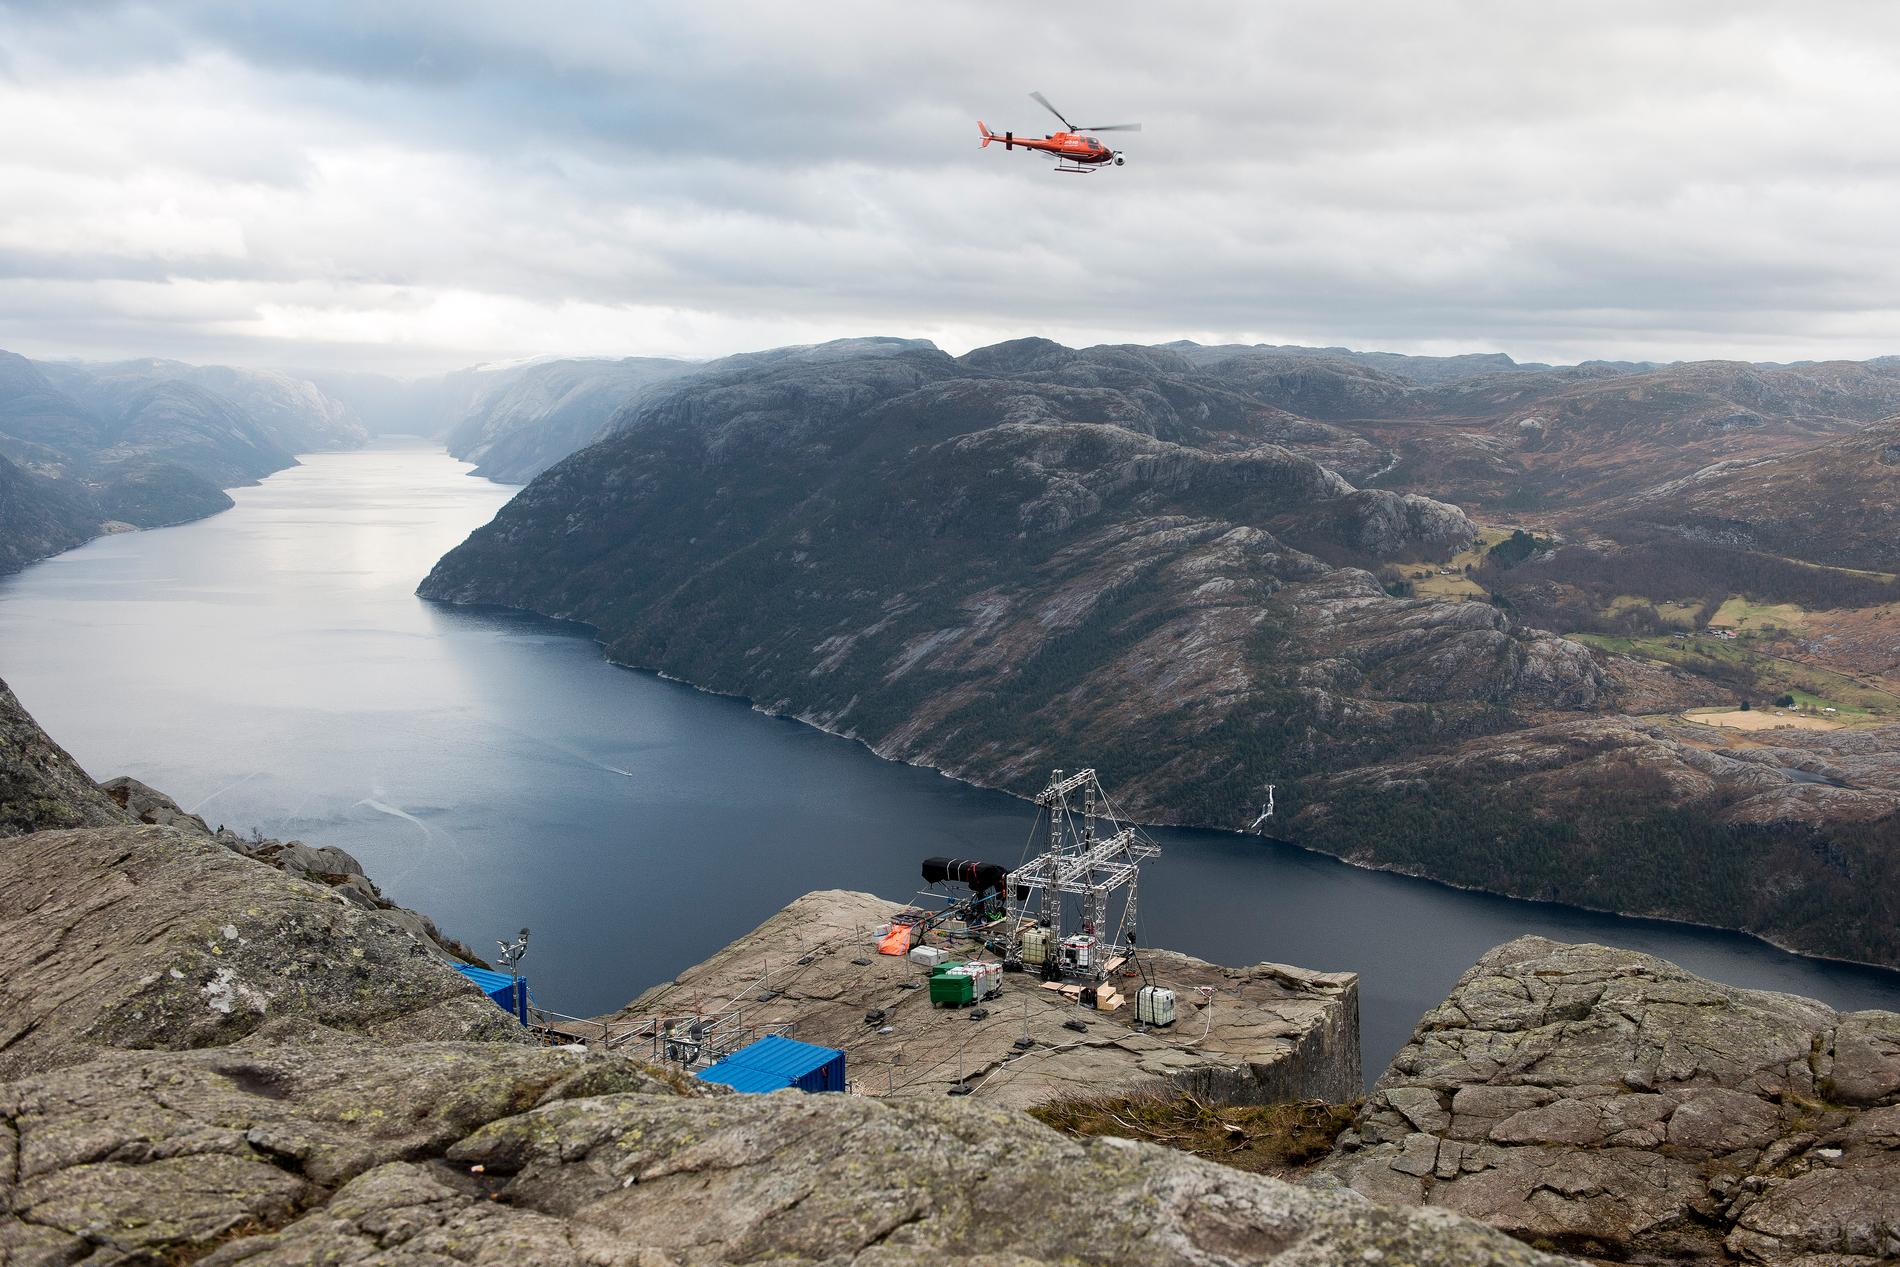 STAR VISIT: There was no shortage of helicopter activity in Preikestolen in the fall of 2017, certainly not for sightseeing but for the filming of the film Mission Impossible, with Tom Cruise in the lead. 